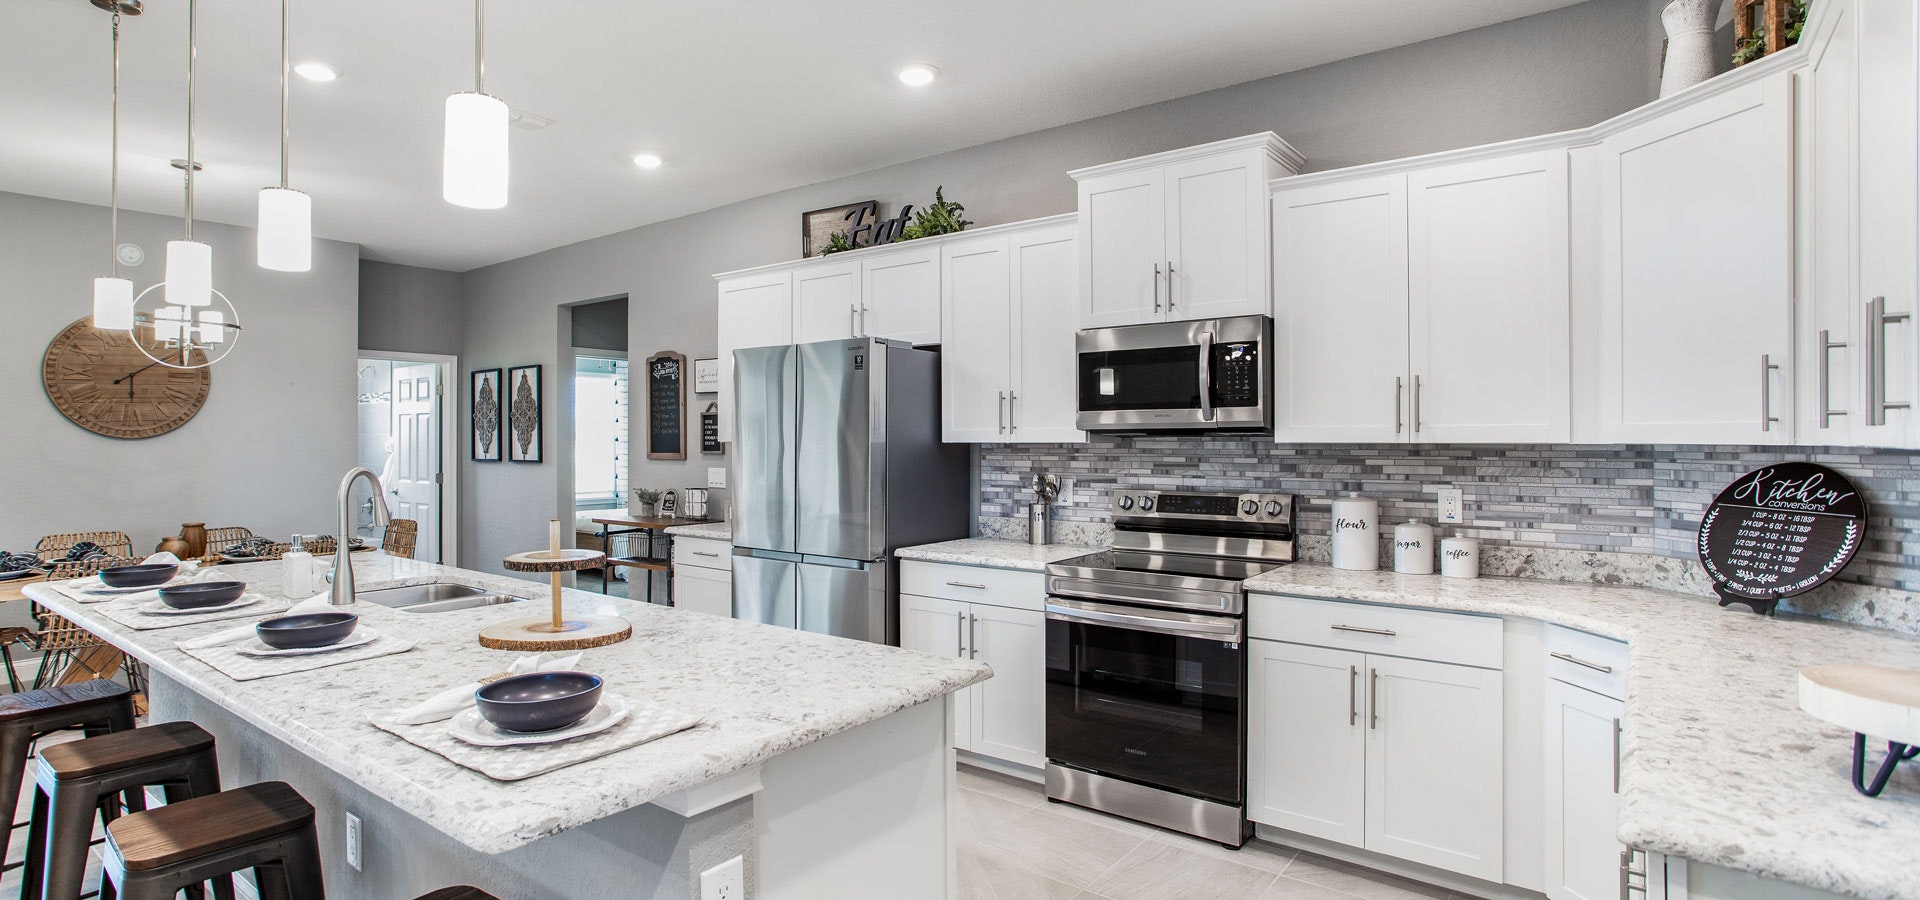 Gourmet kitchen in a new home at Gardens at Lancaster Park East in St. Cloud, FL